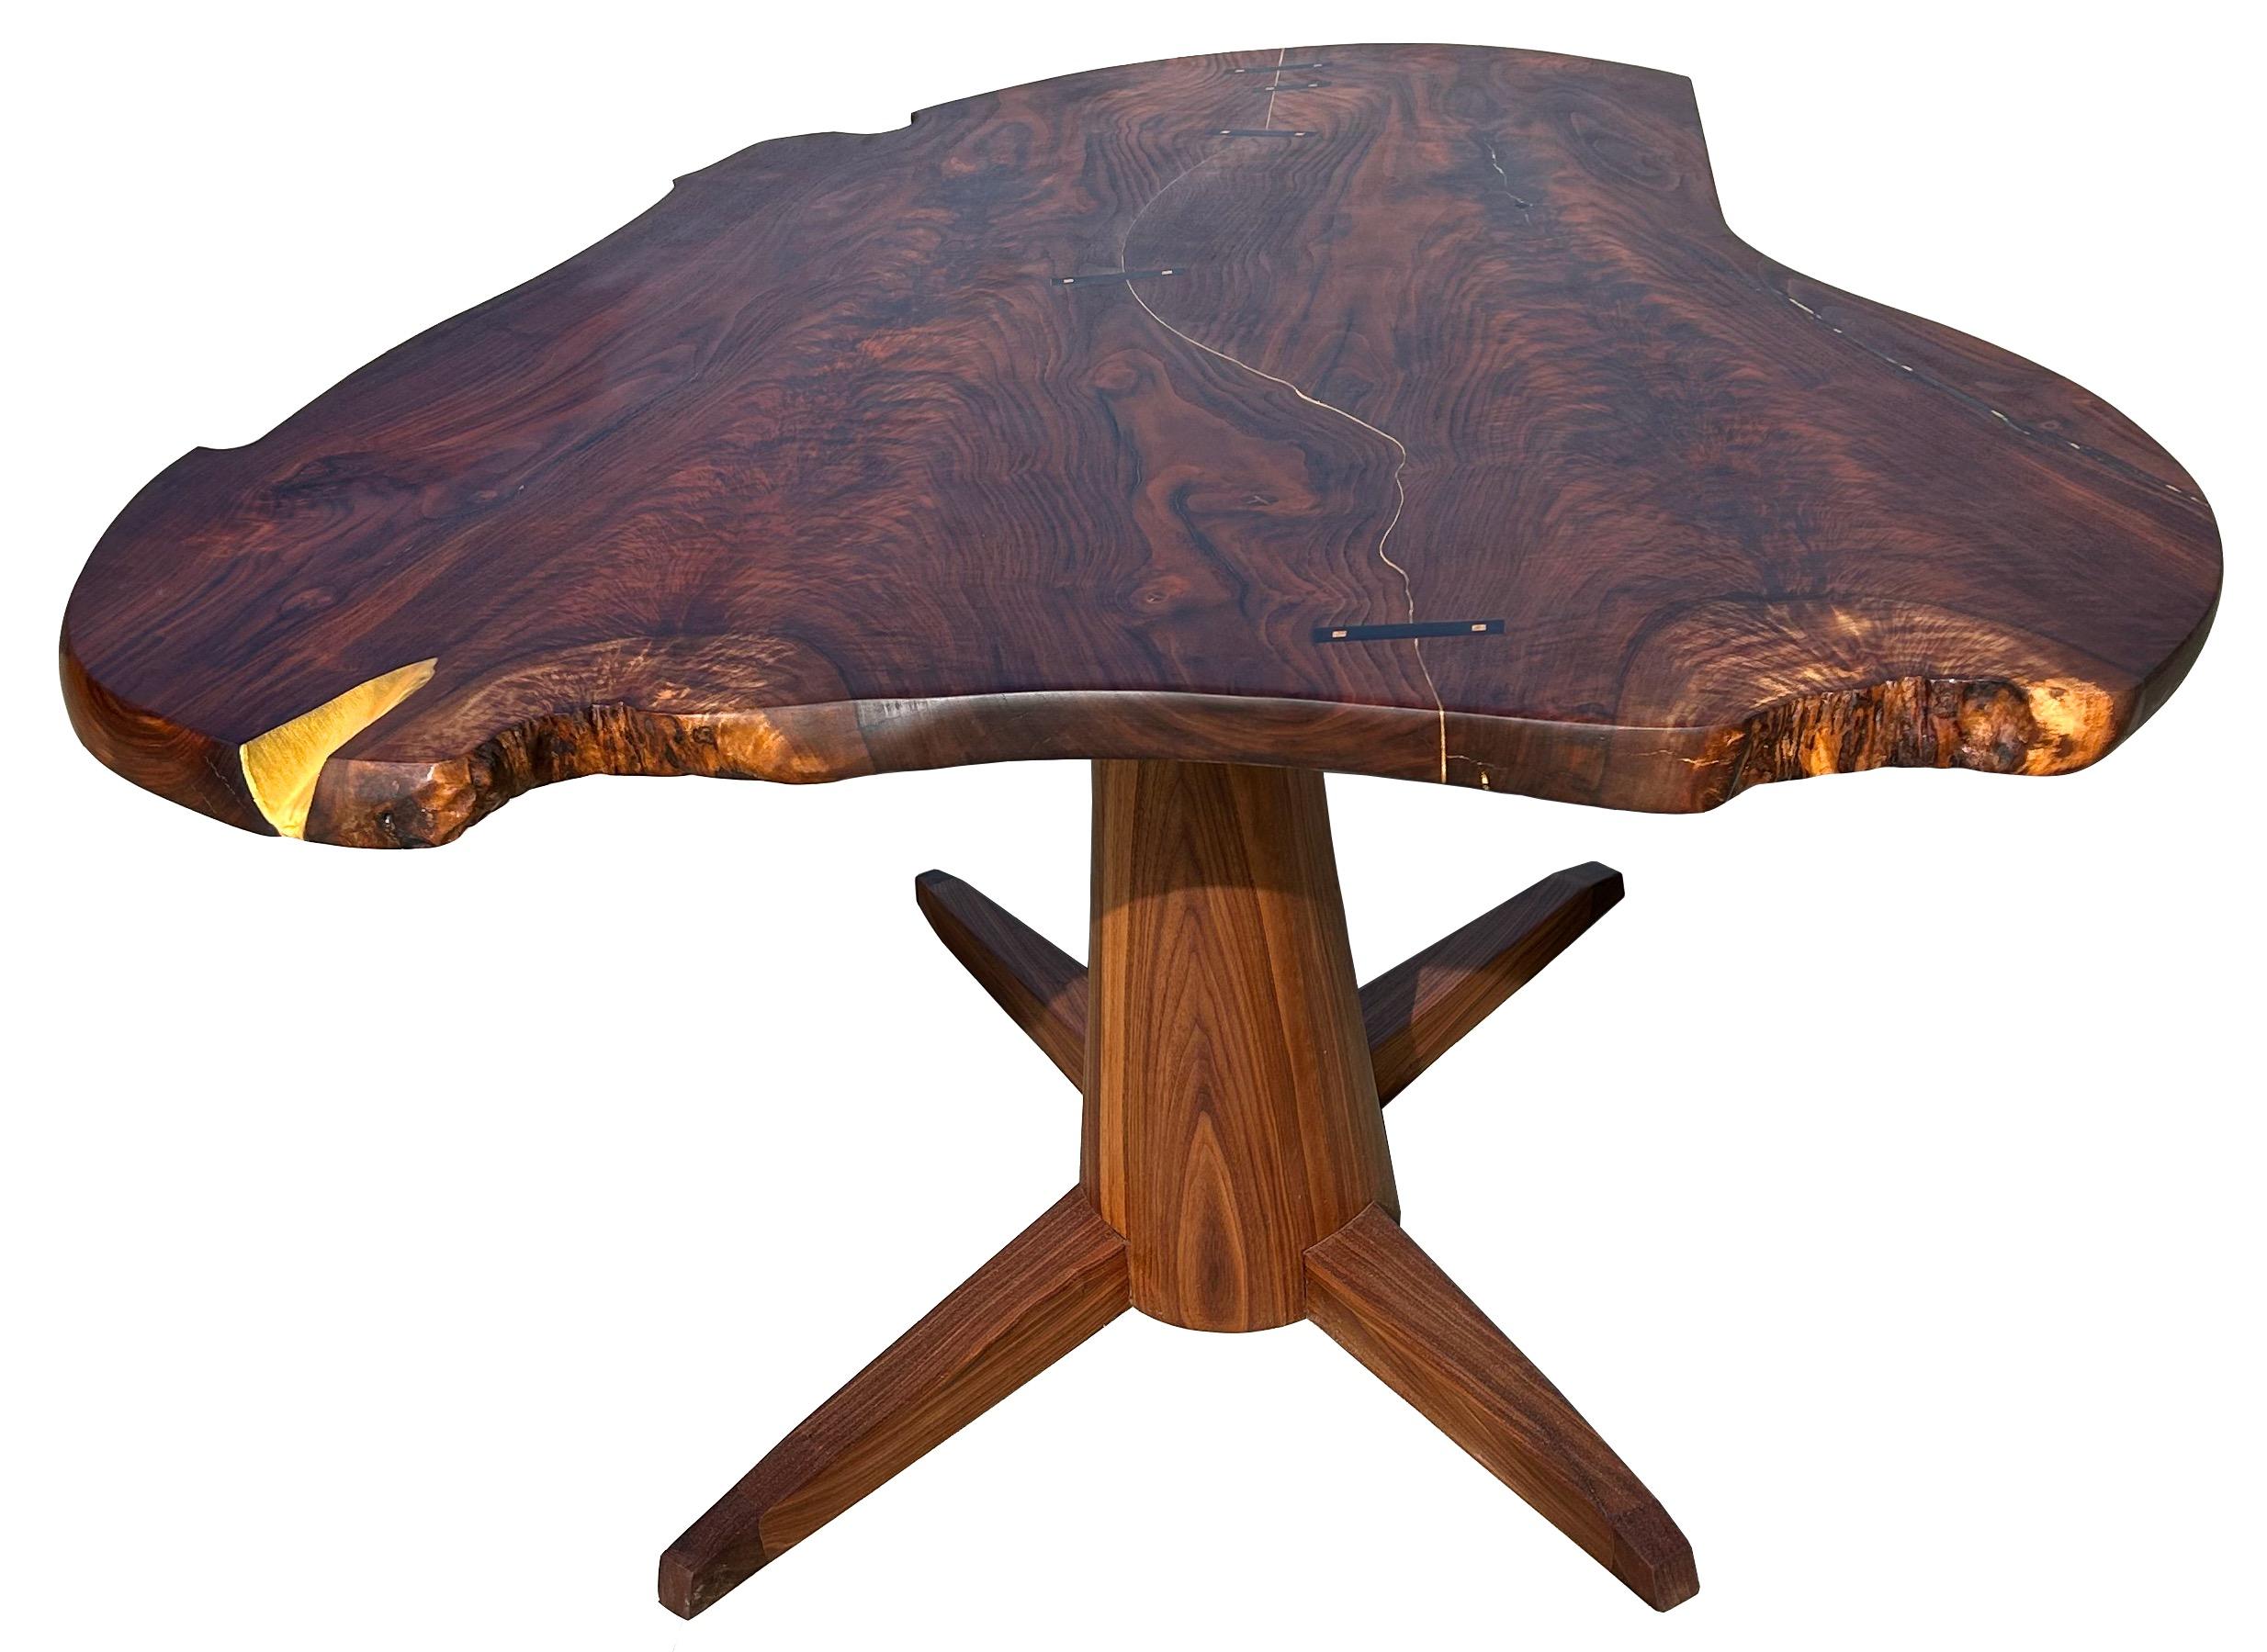 Contemporary Kintsugi ( 金継ぎ ) Dining Table For Sale